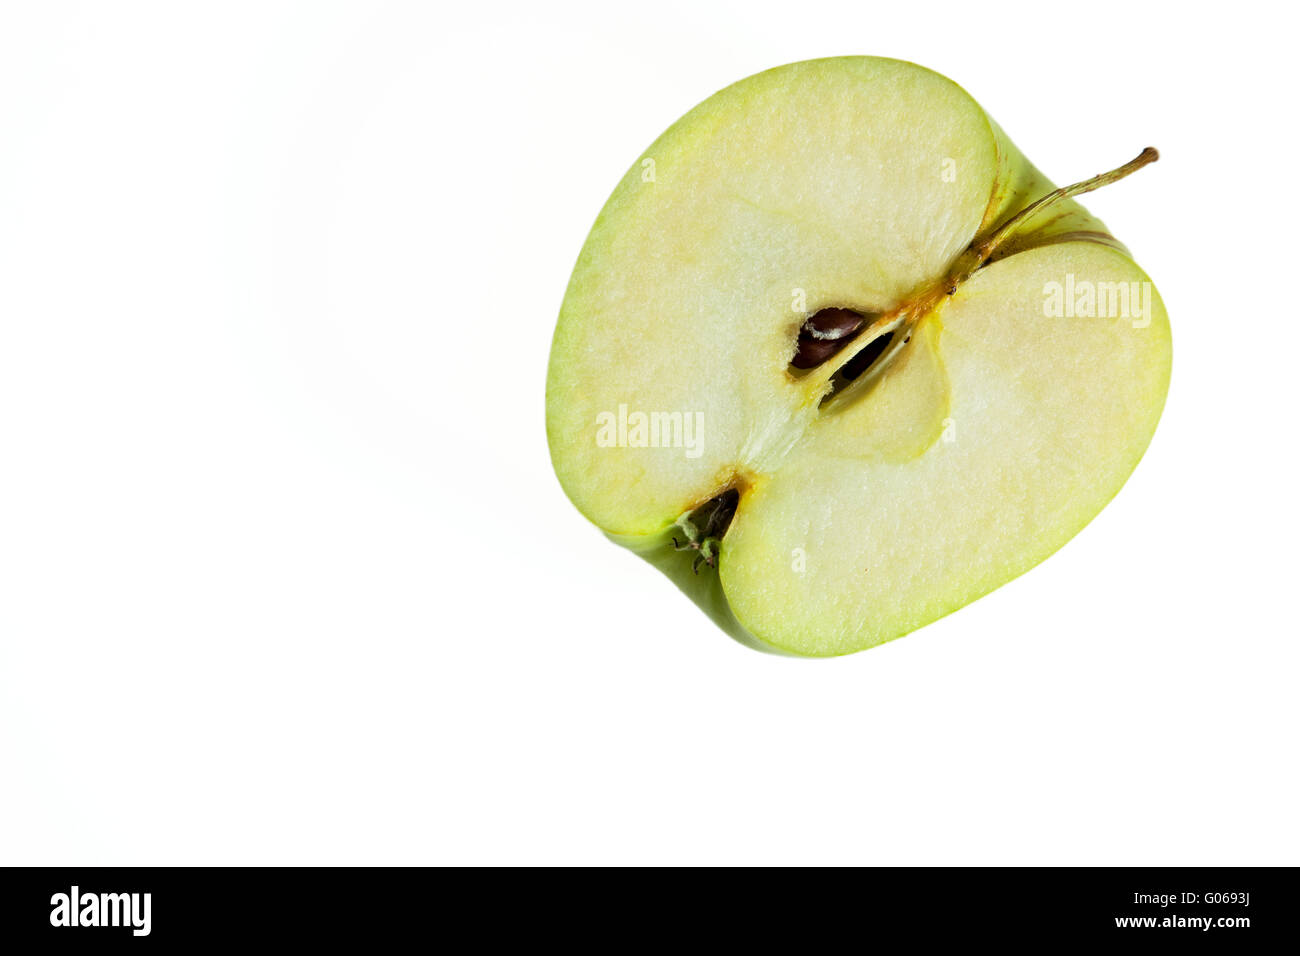 Green Apple isolated on white studio shot Banque D'Images